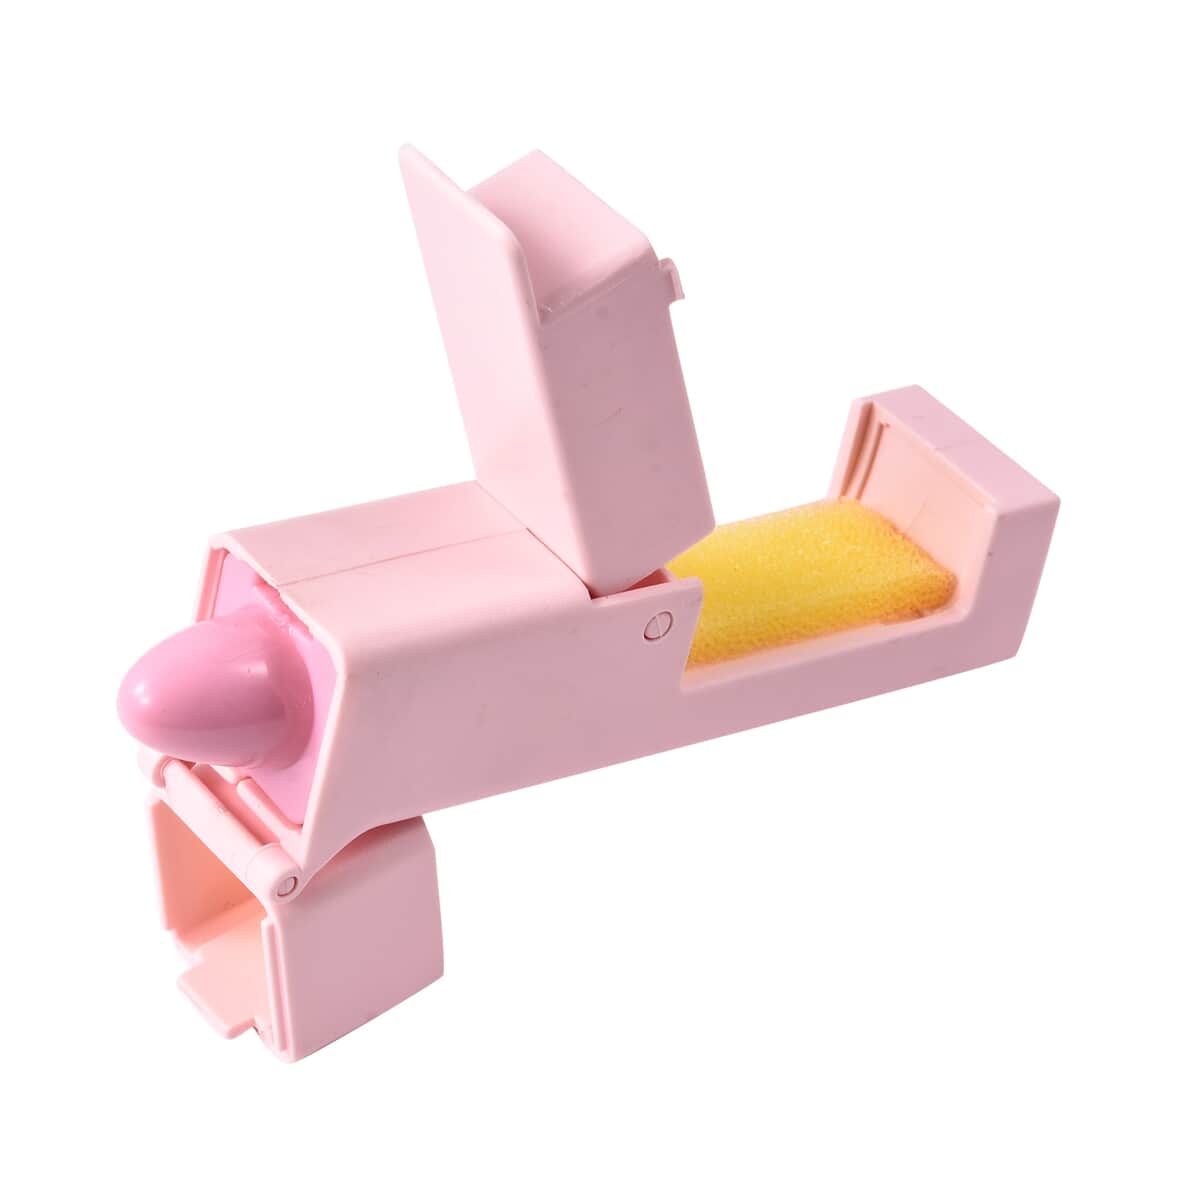 No Contact Sanitary Tool with Small Storage Bottle -Pink image number 0